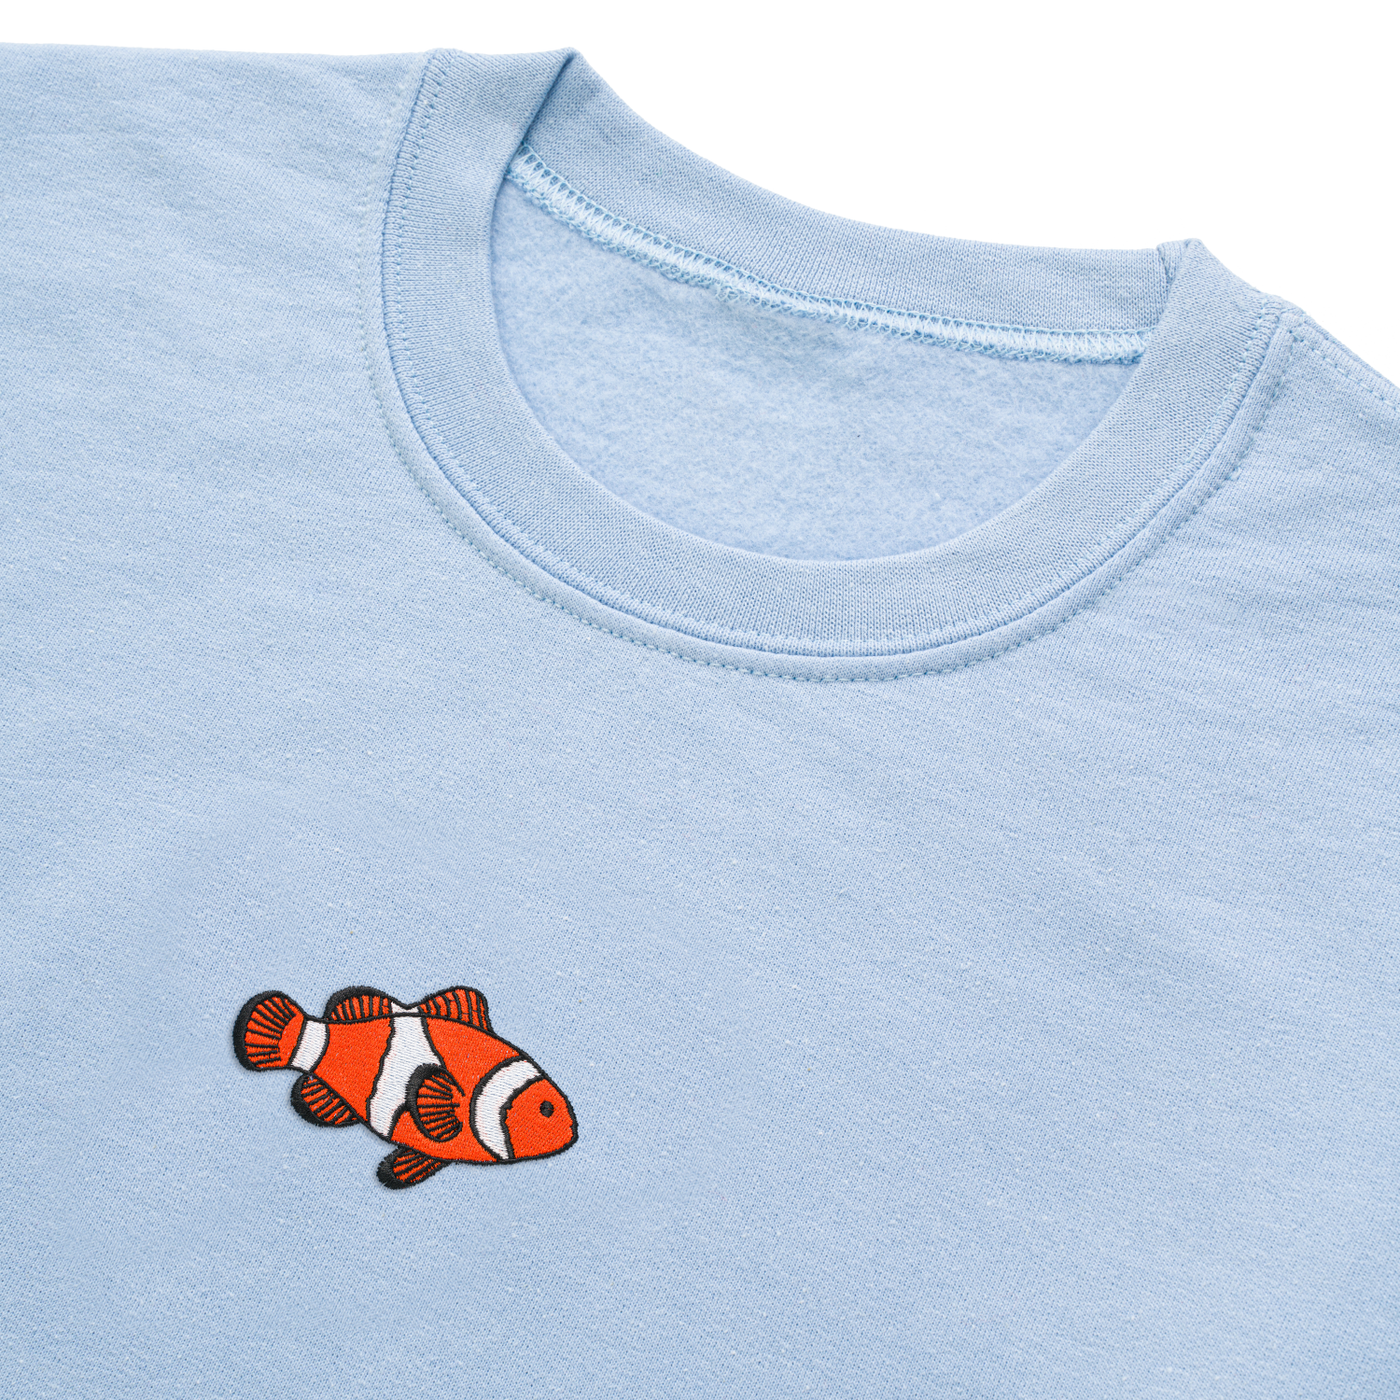 Bobby's Planet Women's Embroidered Clownfish Sweatshirt from Seven Seas Fish Animals Collection in Light Blue Color#color_light-blue